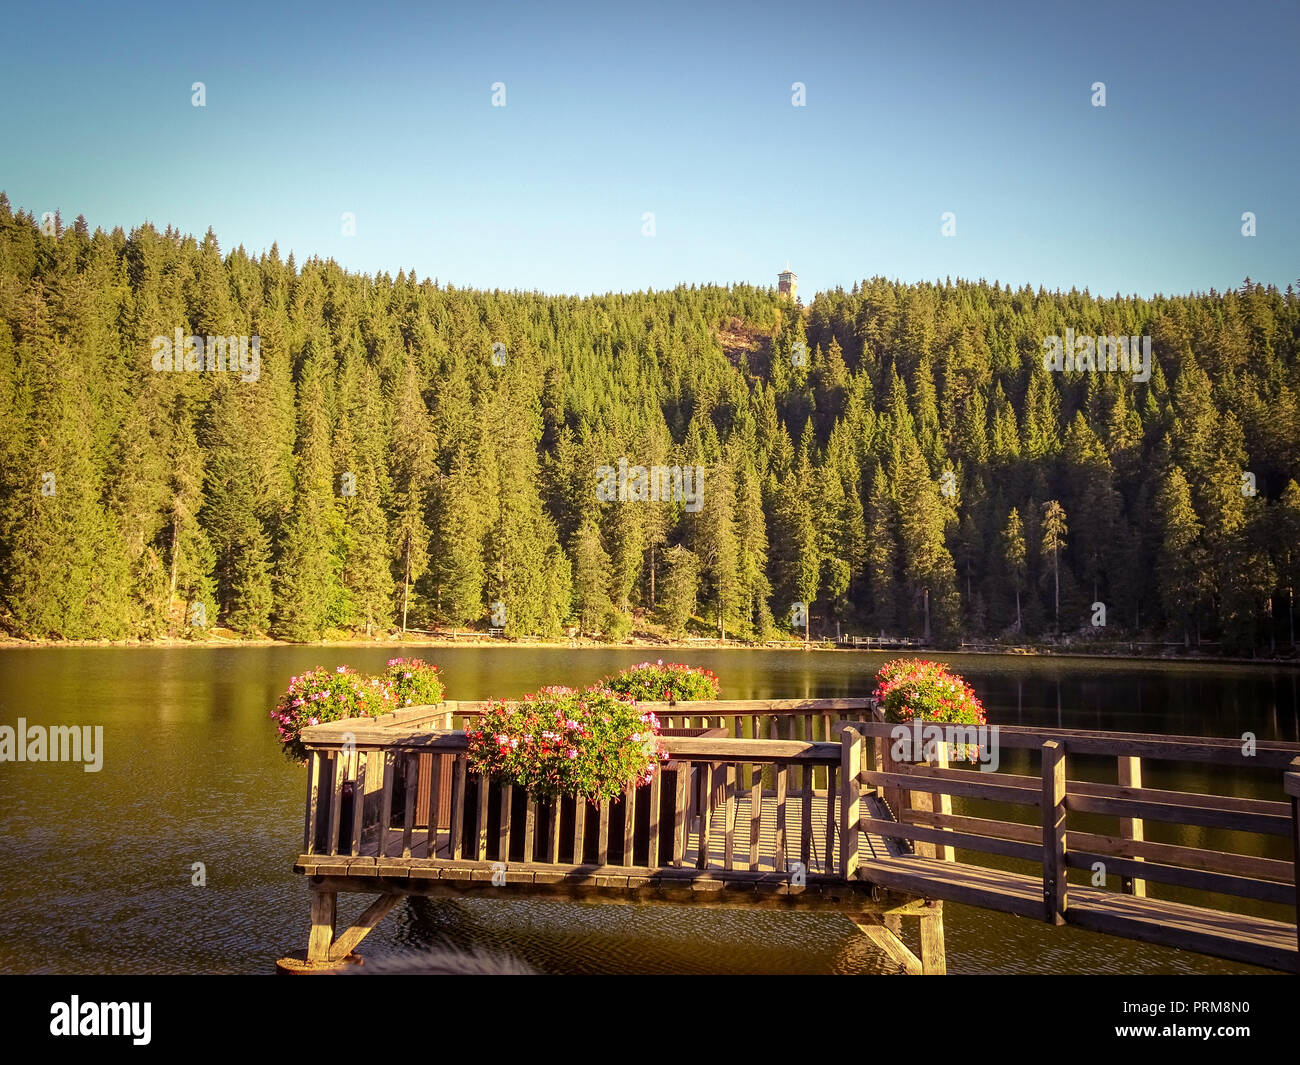 Mummelsee in the Black Forest Germany Stock Photo